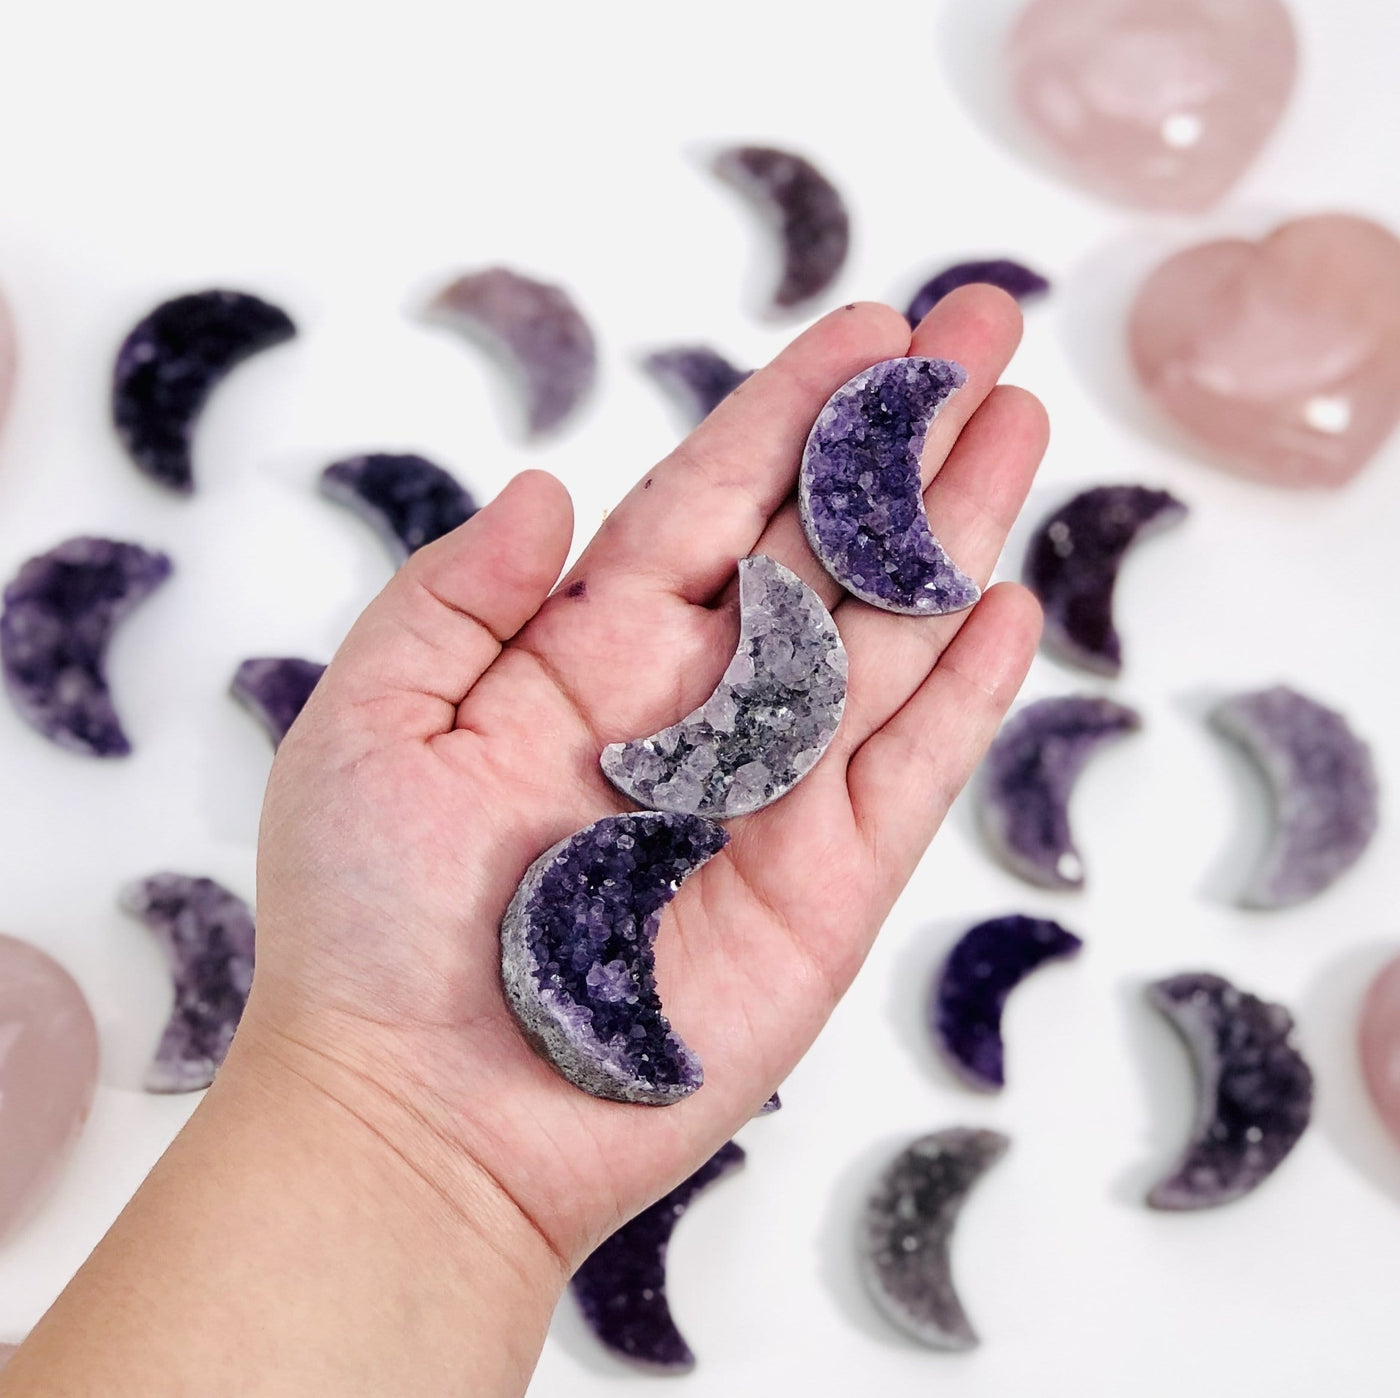 3 amethyst crescent moons in hand to show various purple tones